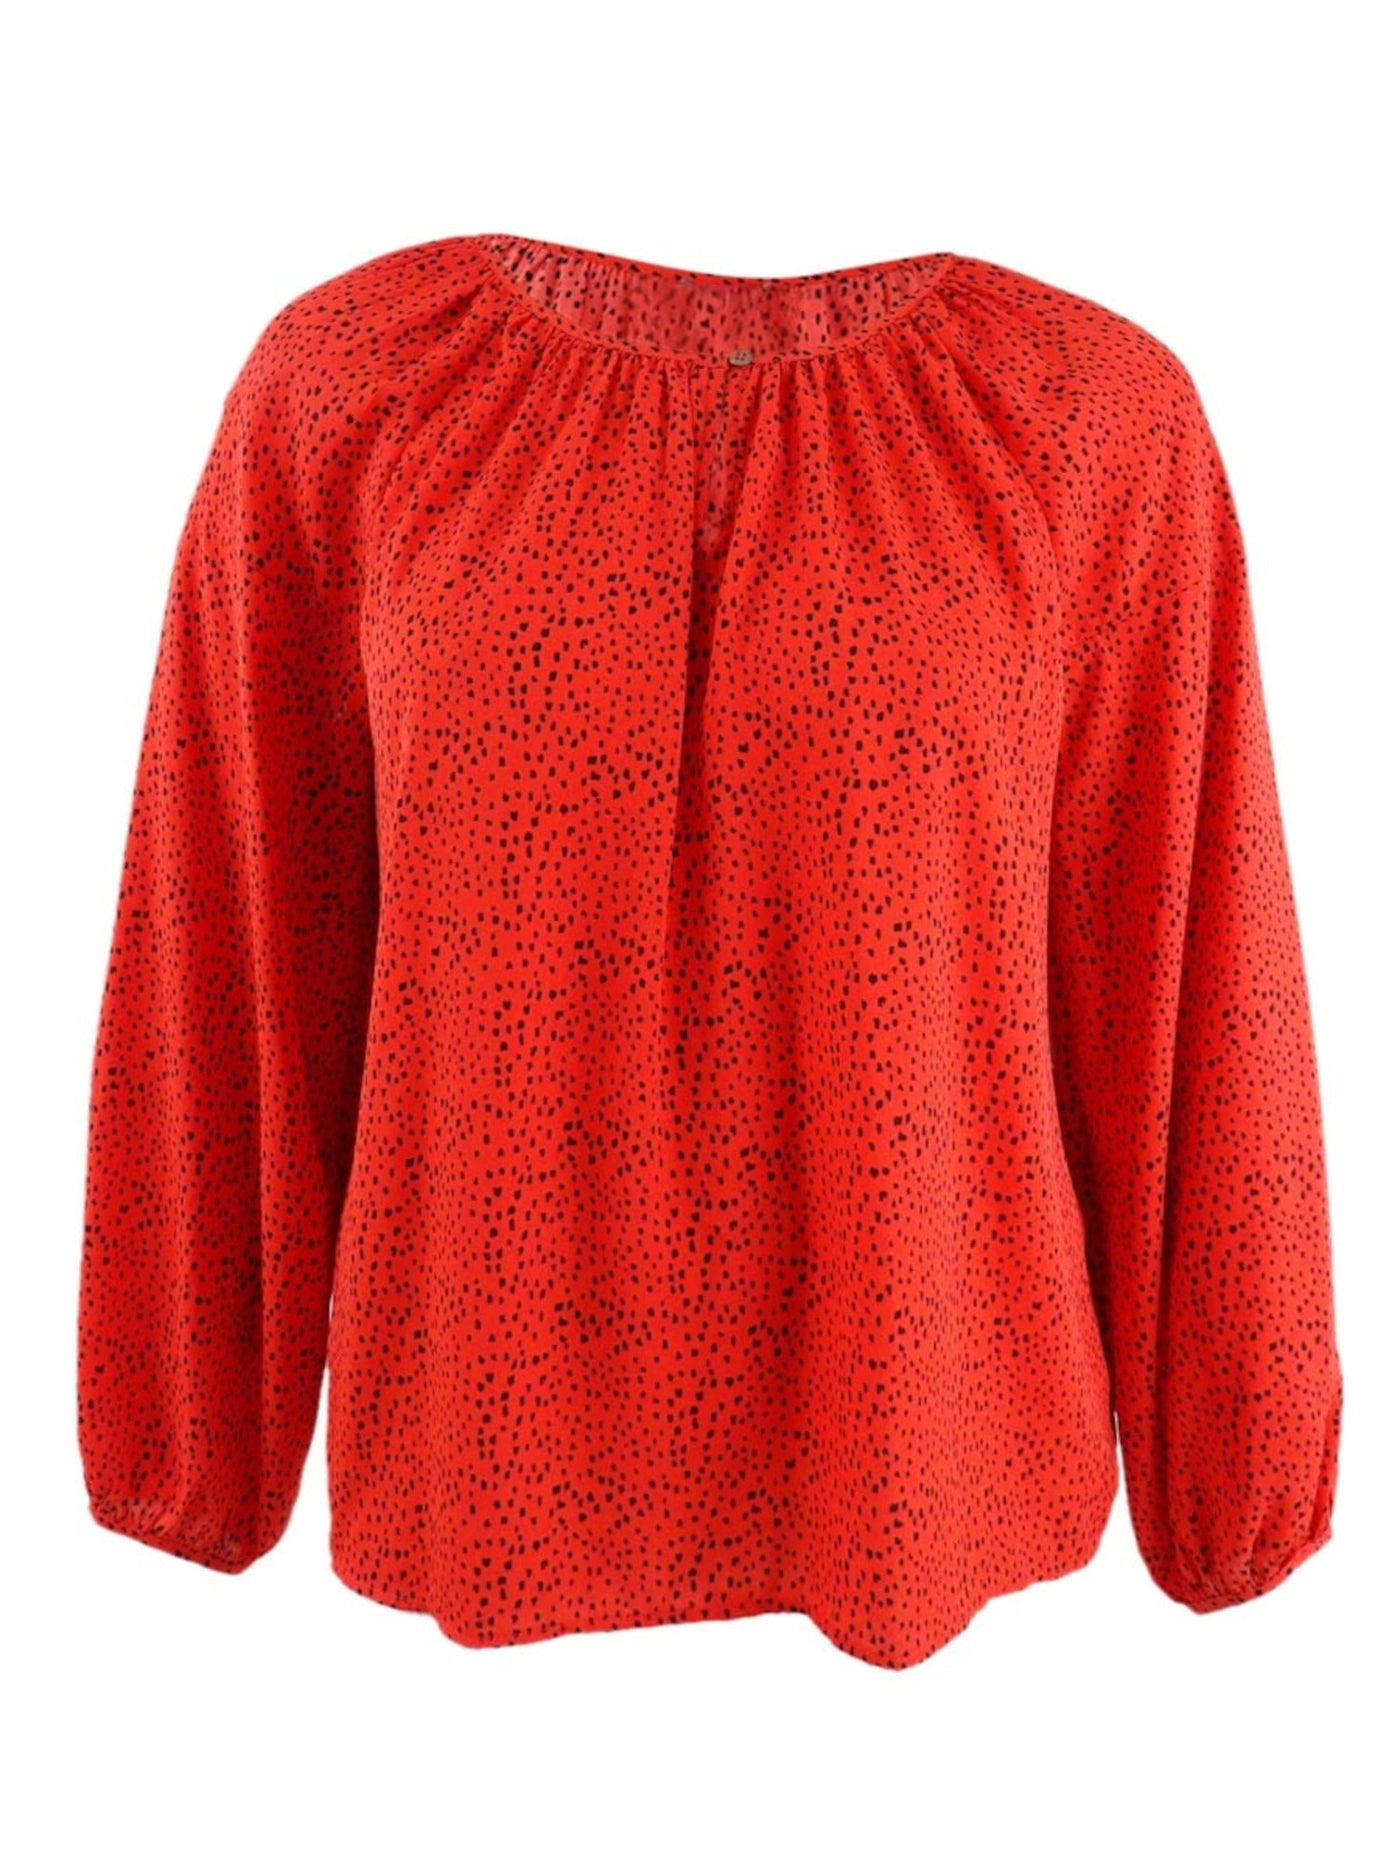 VINCE CAMUTO Womens Orange Gathered Unlined Drop Shoulders Pullover Polka Dot 3/4 Sleeve Keyhole Wear To Work Peasant Top XL